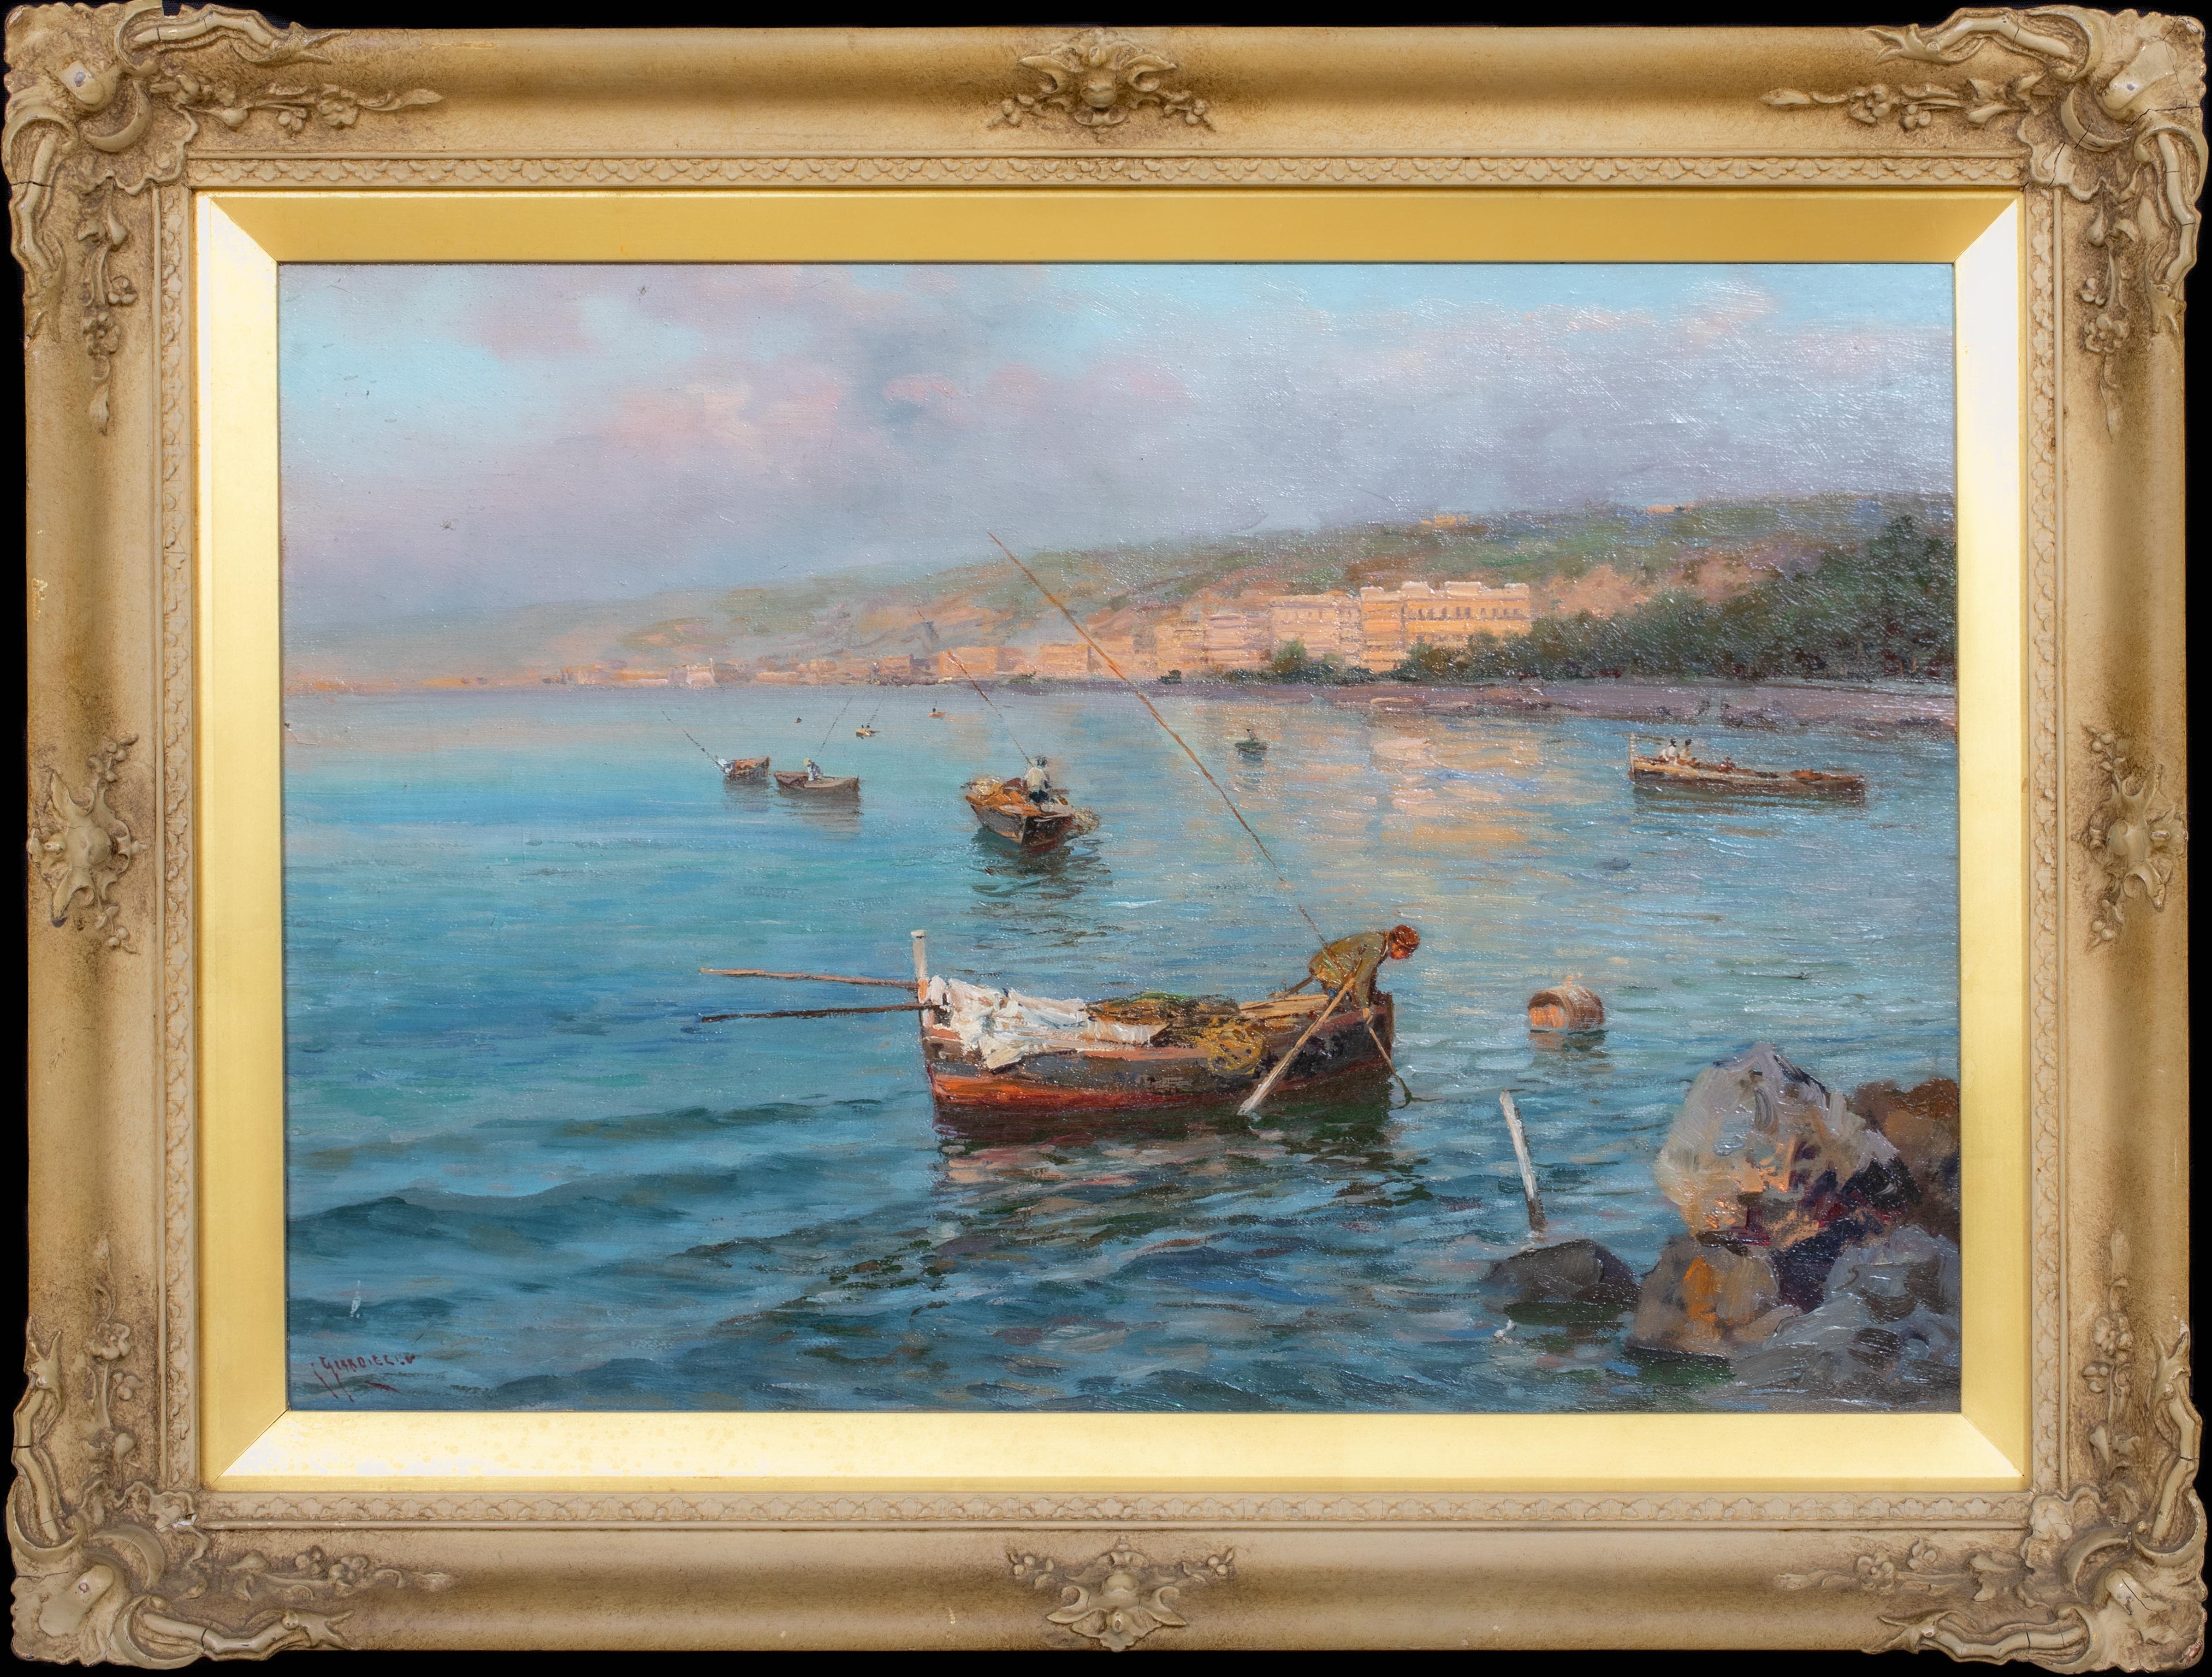 Fishing Off The Bay Of Naples  by GUISEPPE GIARDIELLO (1877-1920)